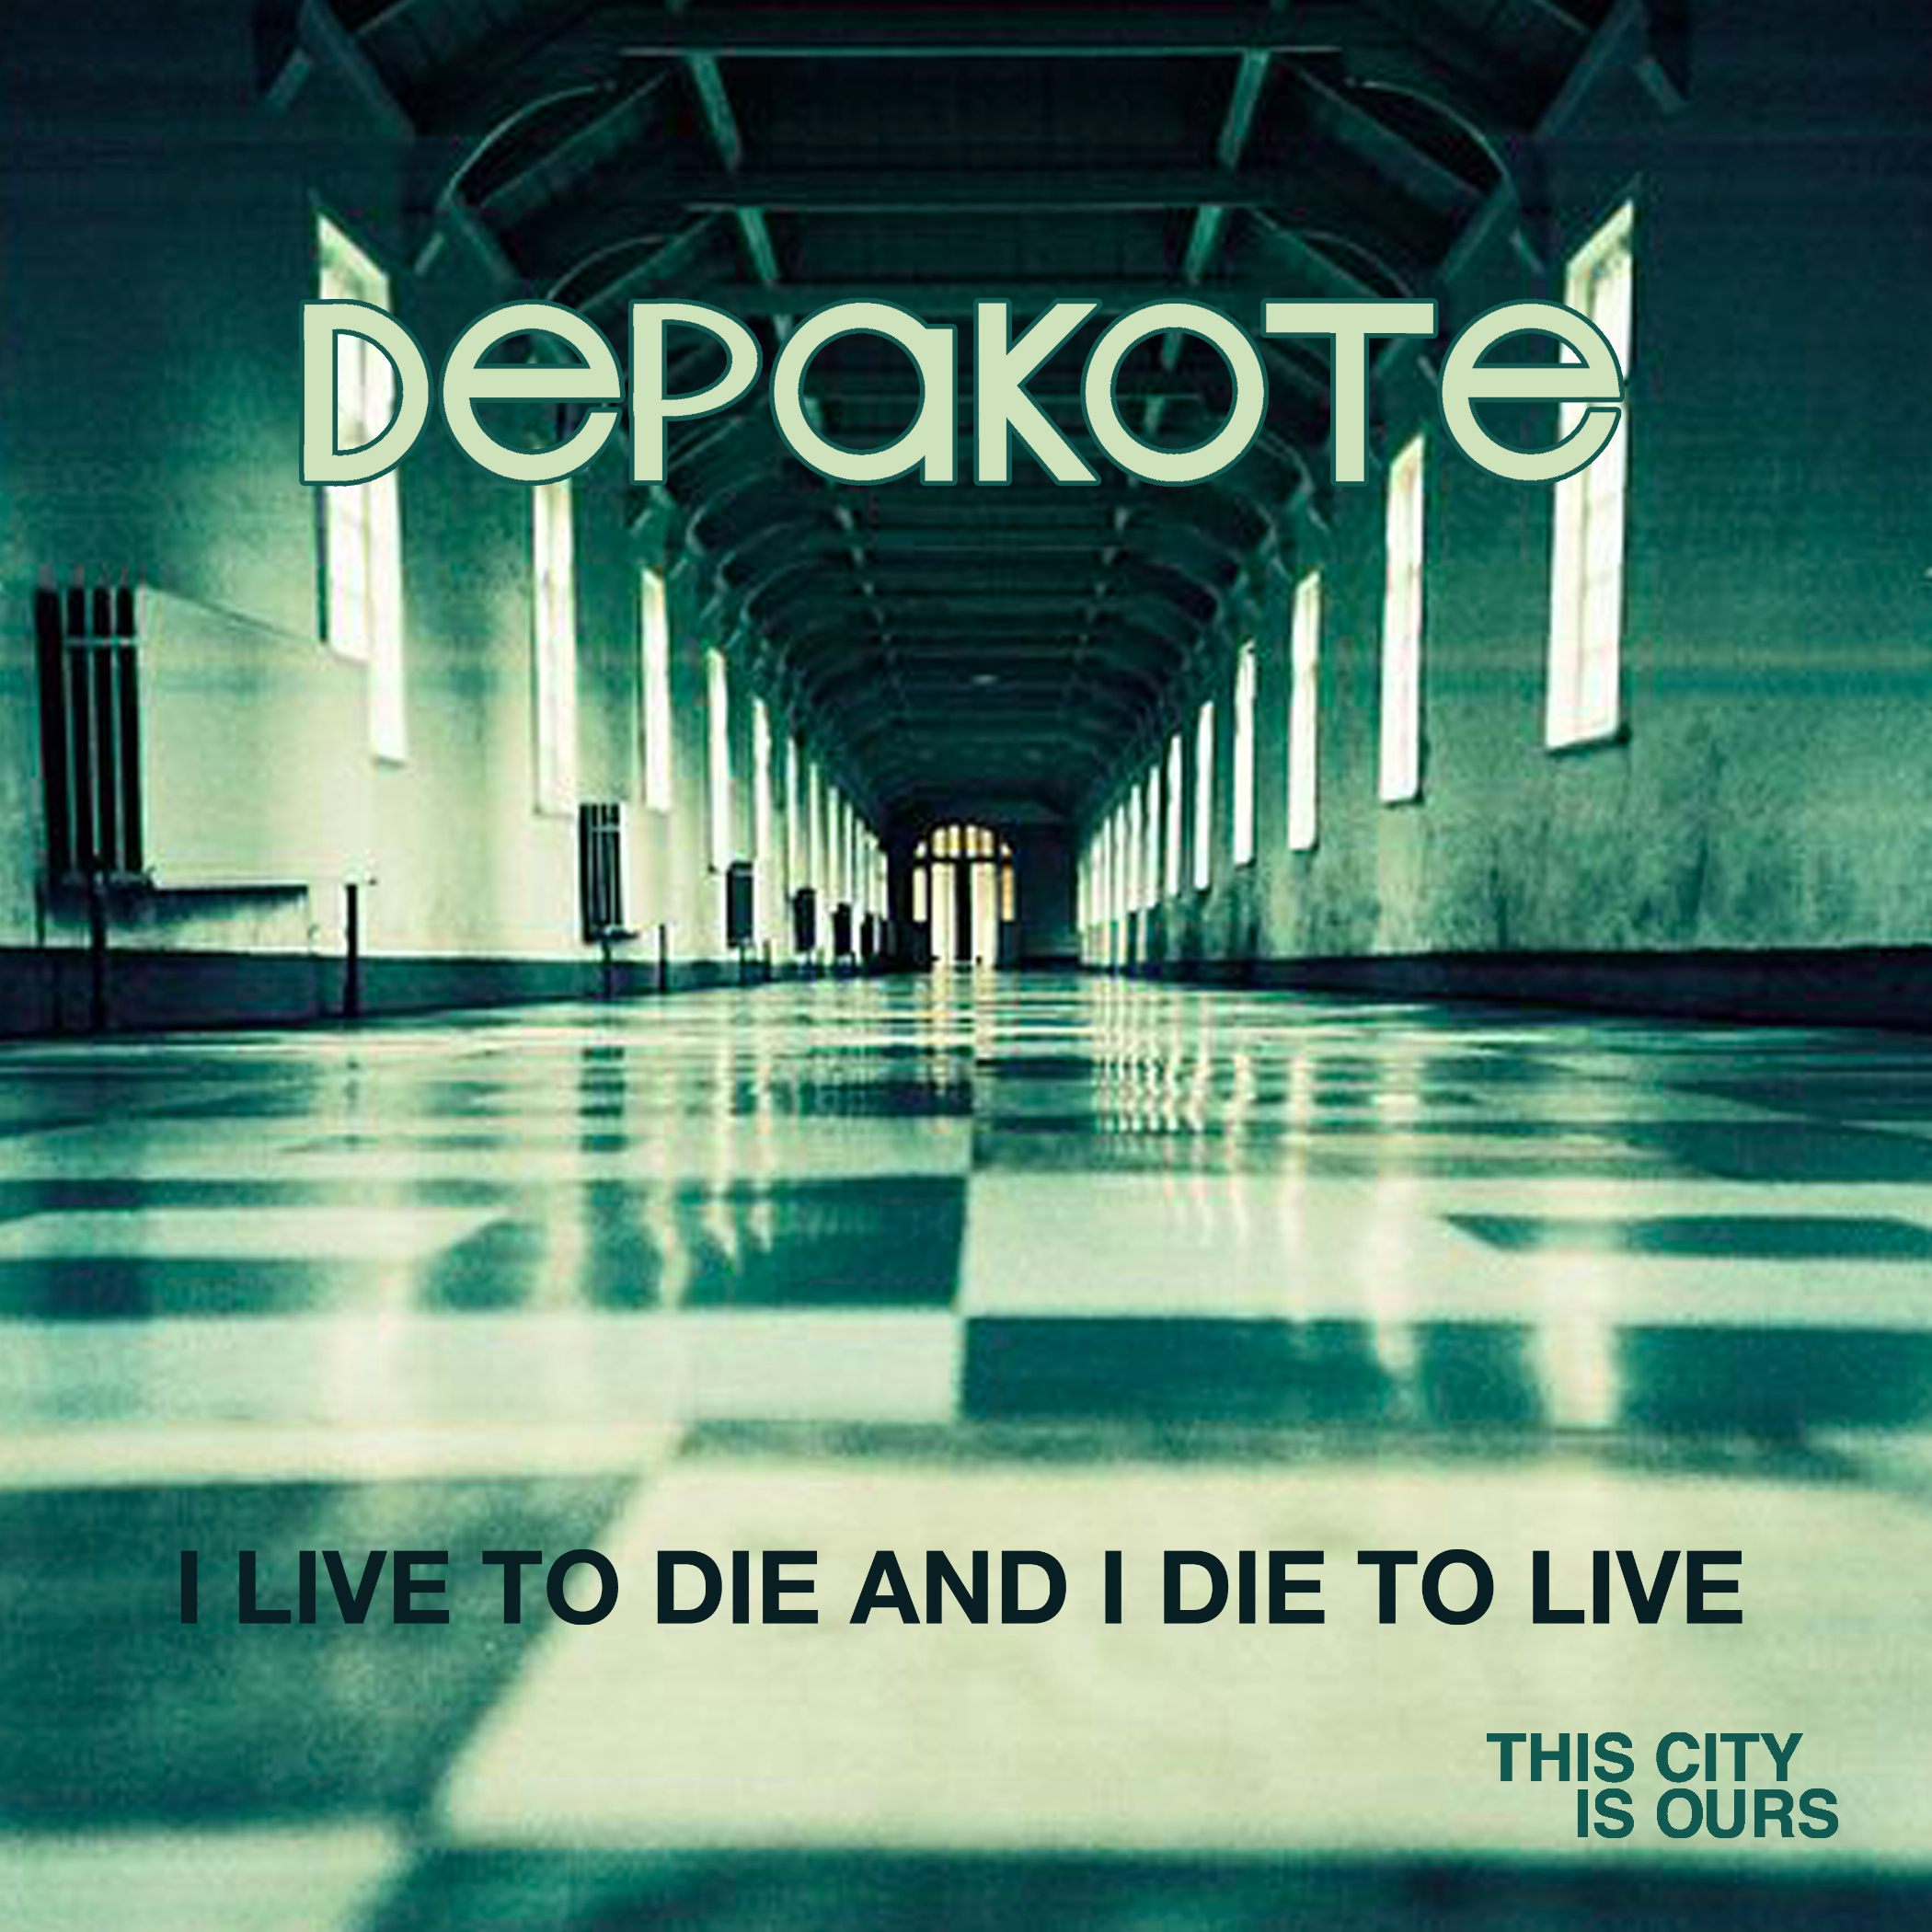 Free Download: Depakote – I Live To Die And I Die To Live (2012)